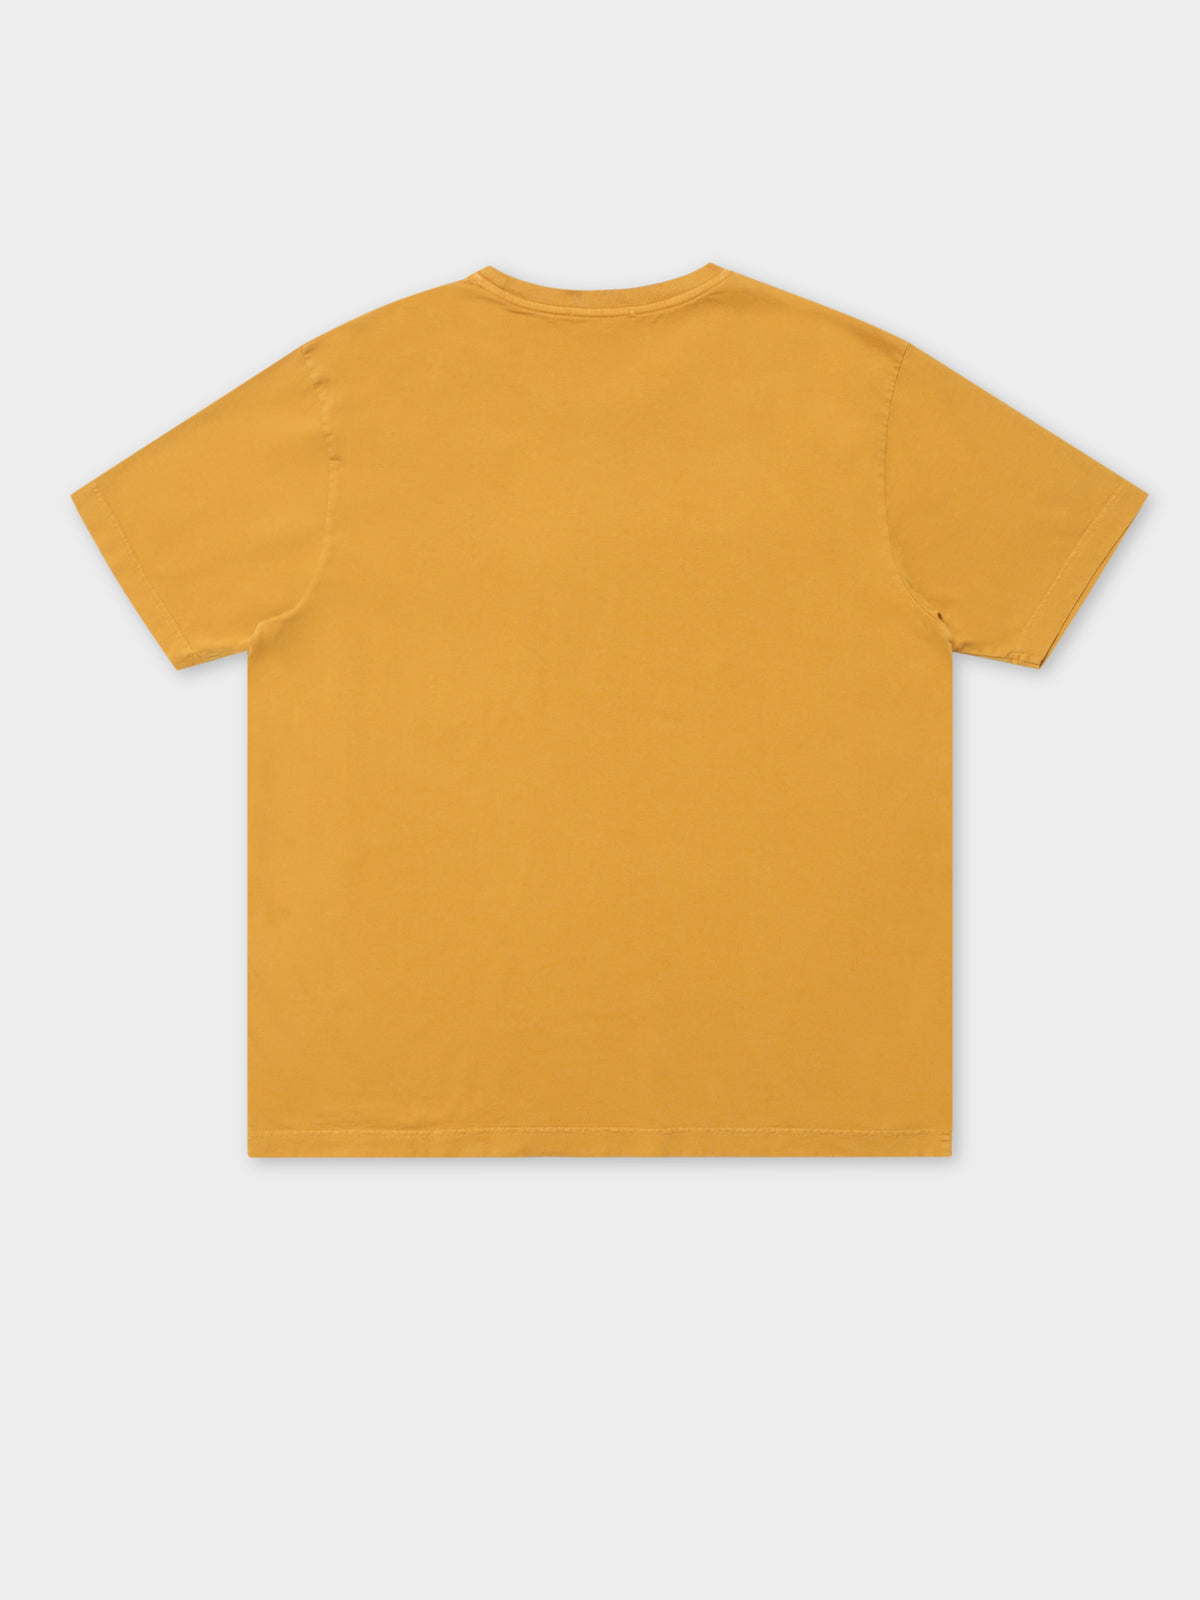 Uno Circle T-Shirt in Amber